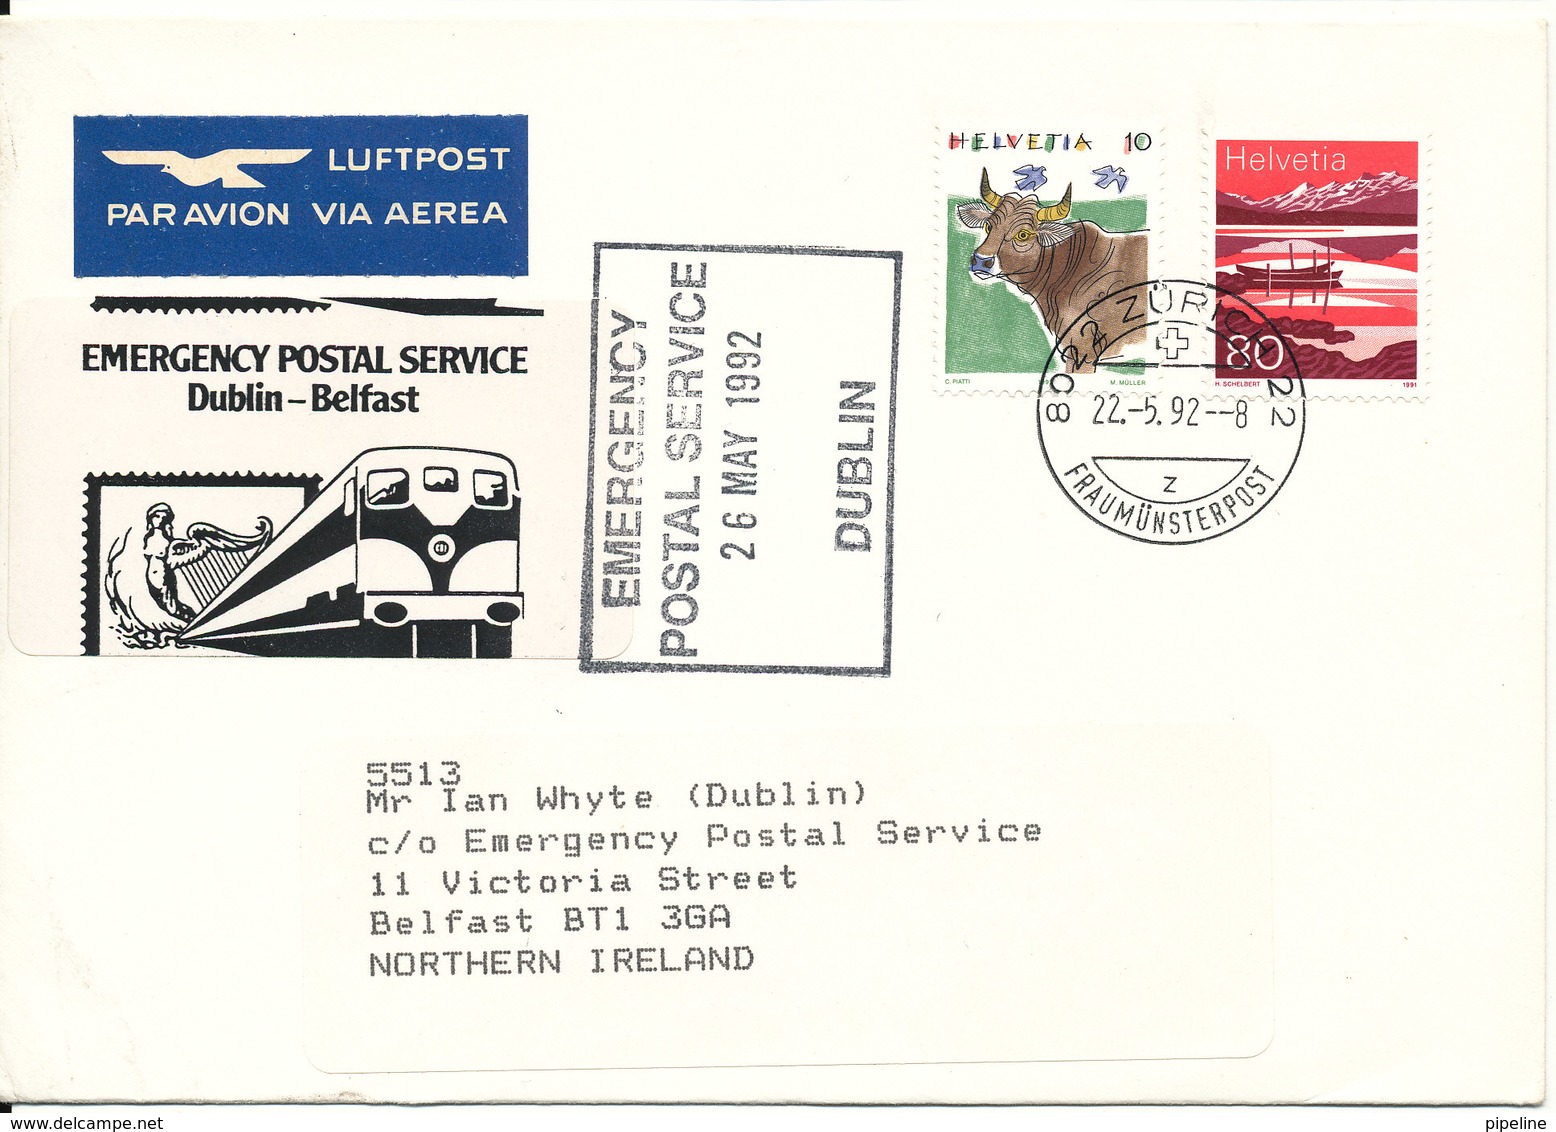 Switzerland Cover Sent To Northern Ireland Emergency Postal Service Dublin - Belfast 22-5-1992 - Covers & Documents